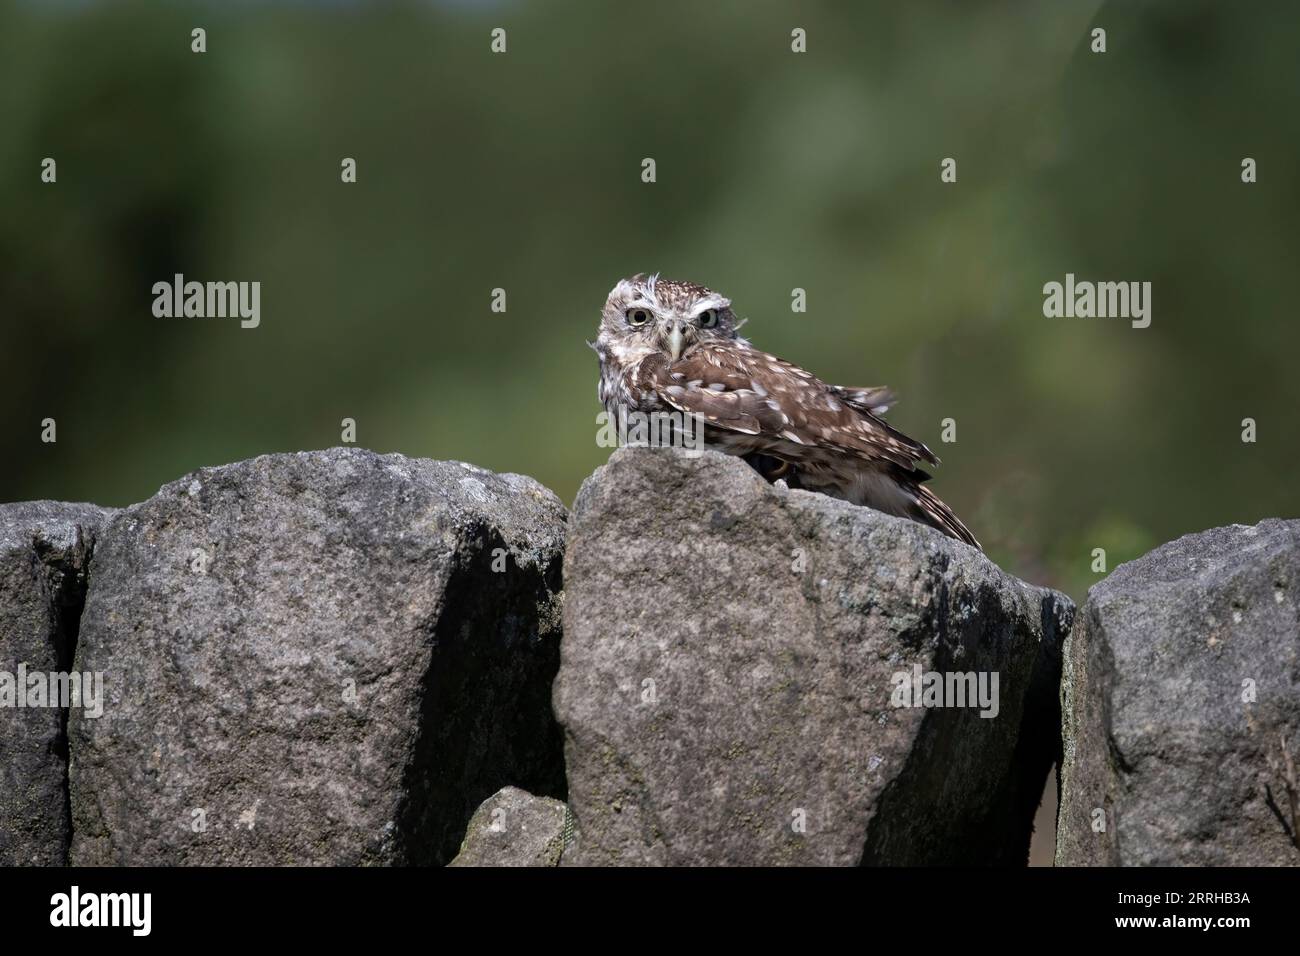 A Little Owl Athene noctua squatting on a countryside stone wall on UK uplands and taken under controlled conditions Stock Photo